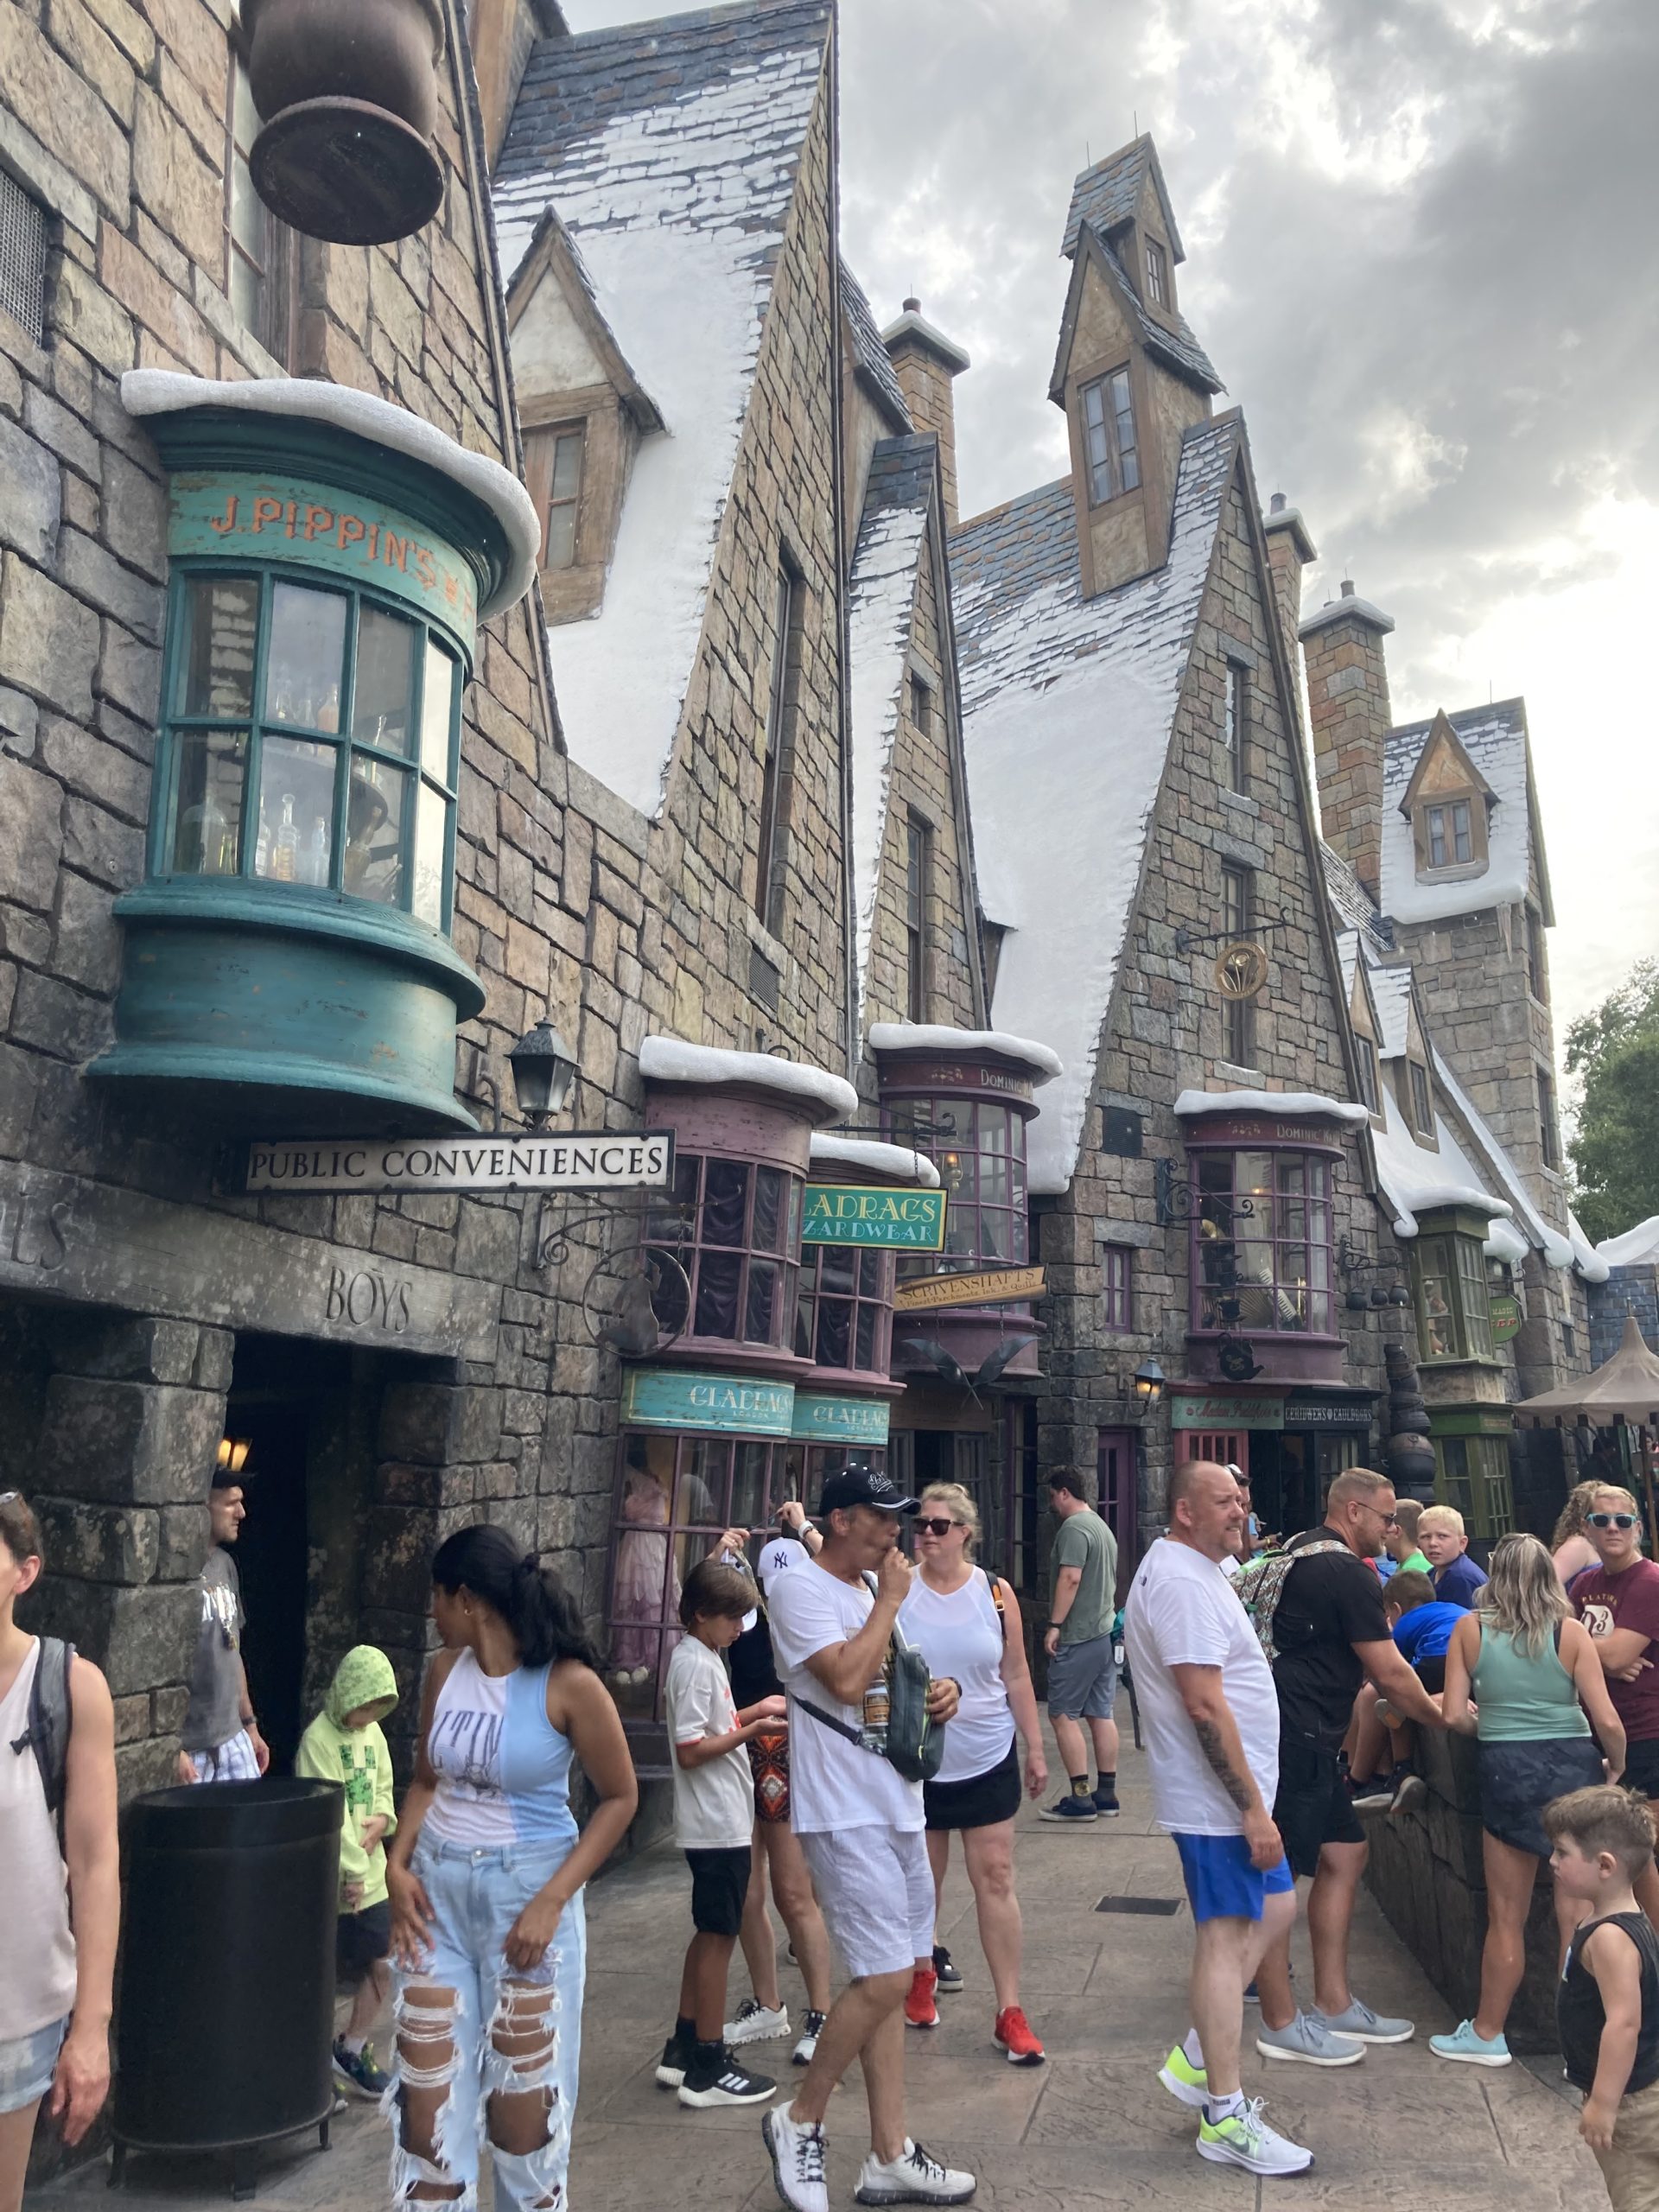 5 Secrets for Busy Days at Universal Orlando’s Islands of Adventure